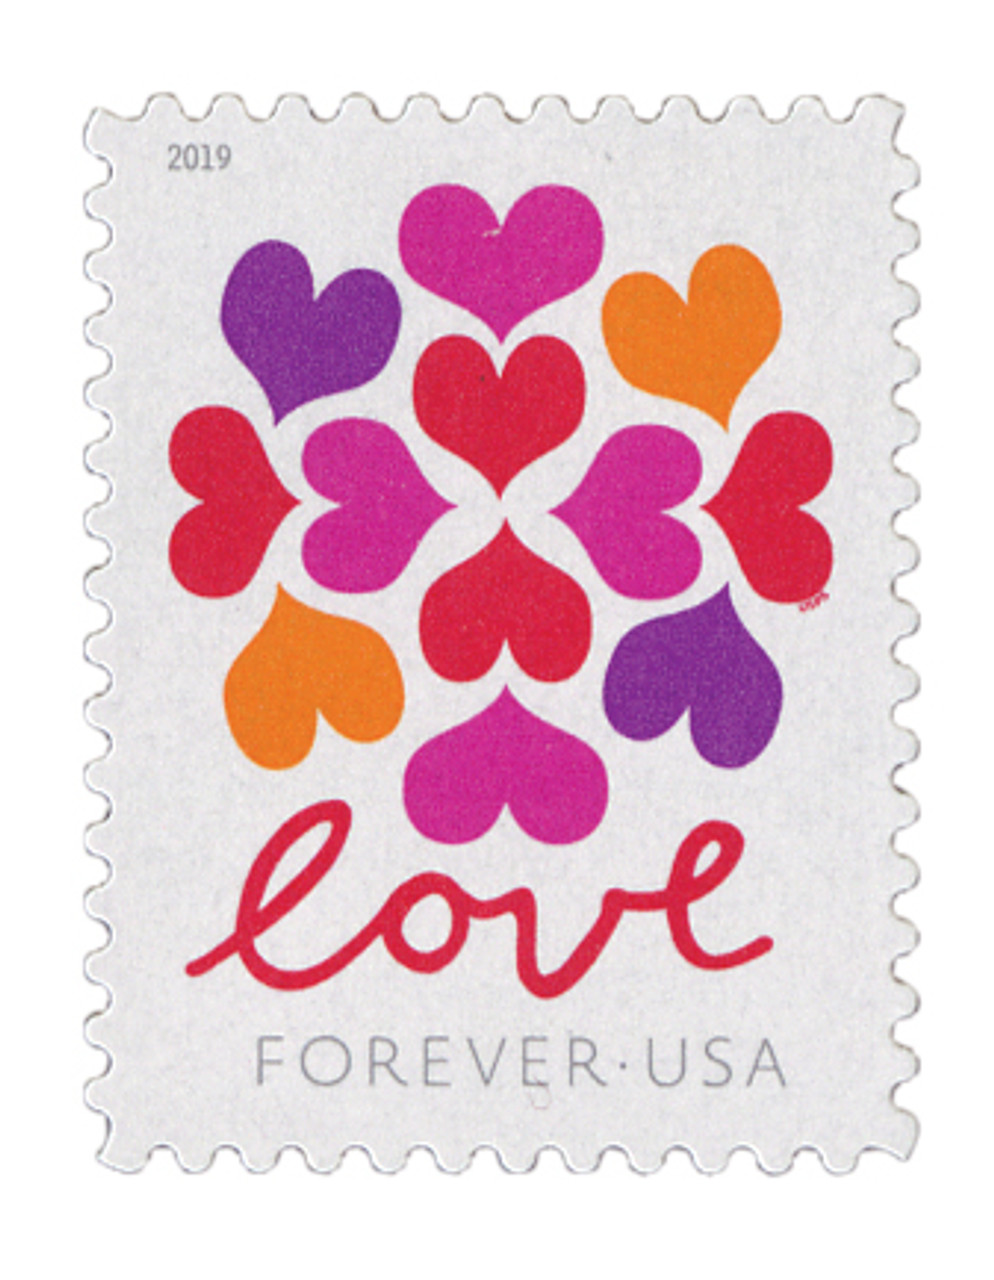 I Love You Forever Stamp Card – Overt Space Gallery and Gift